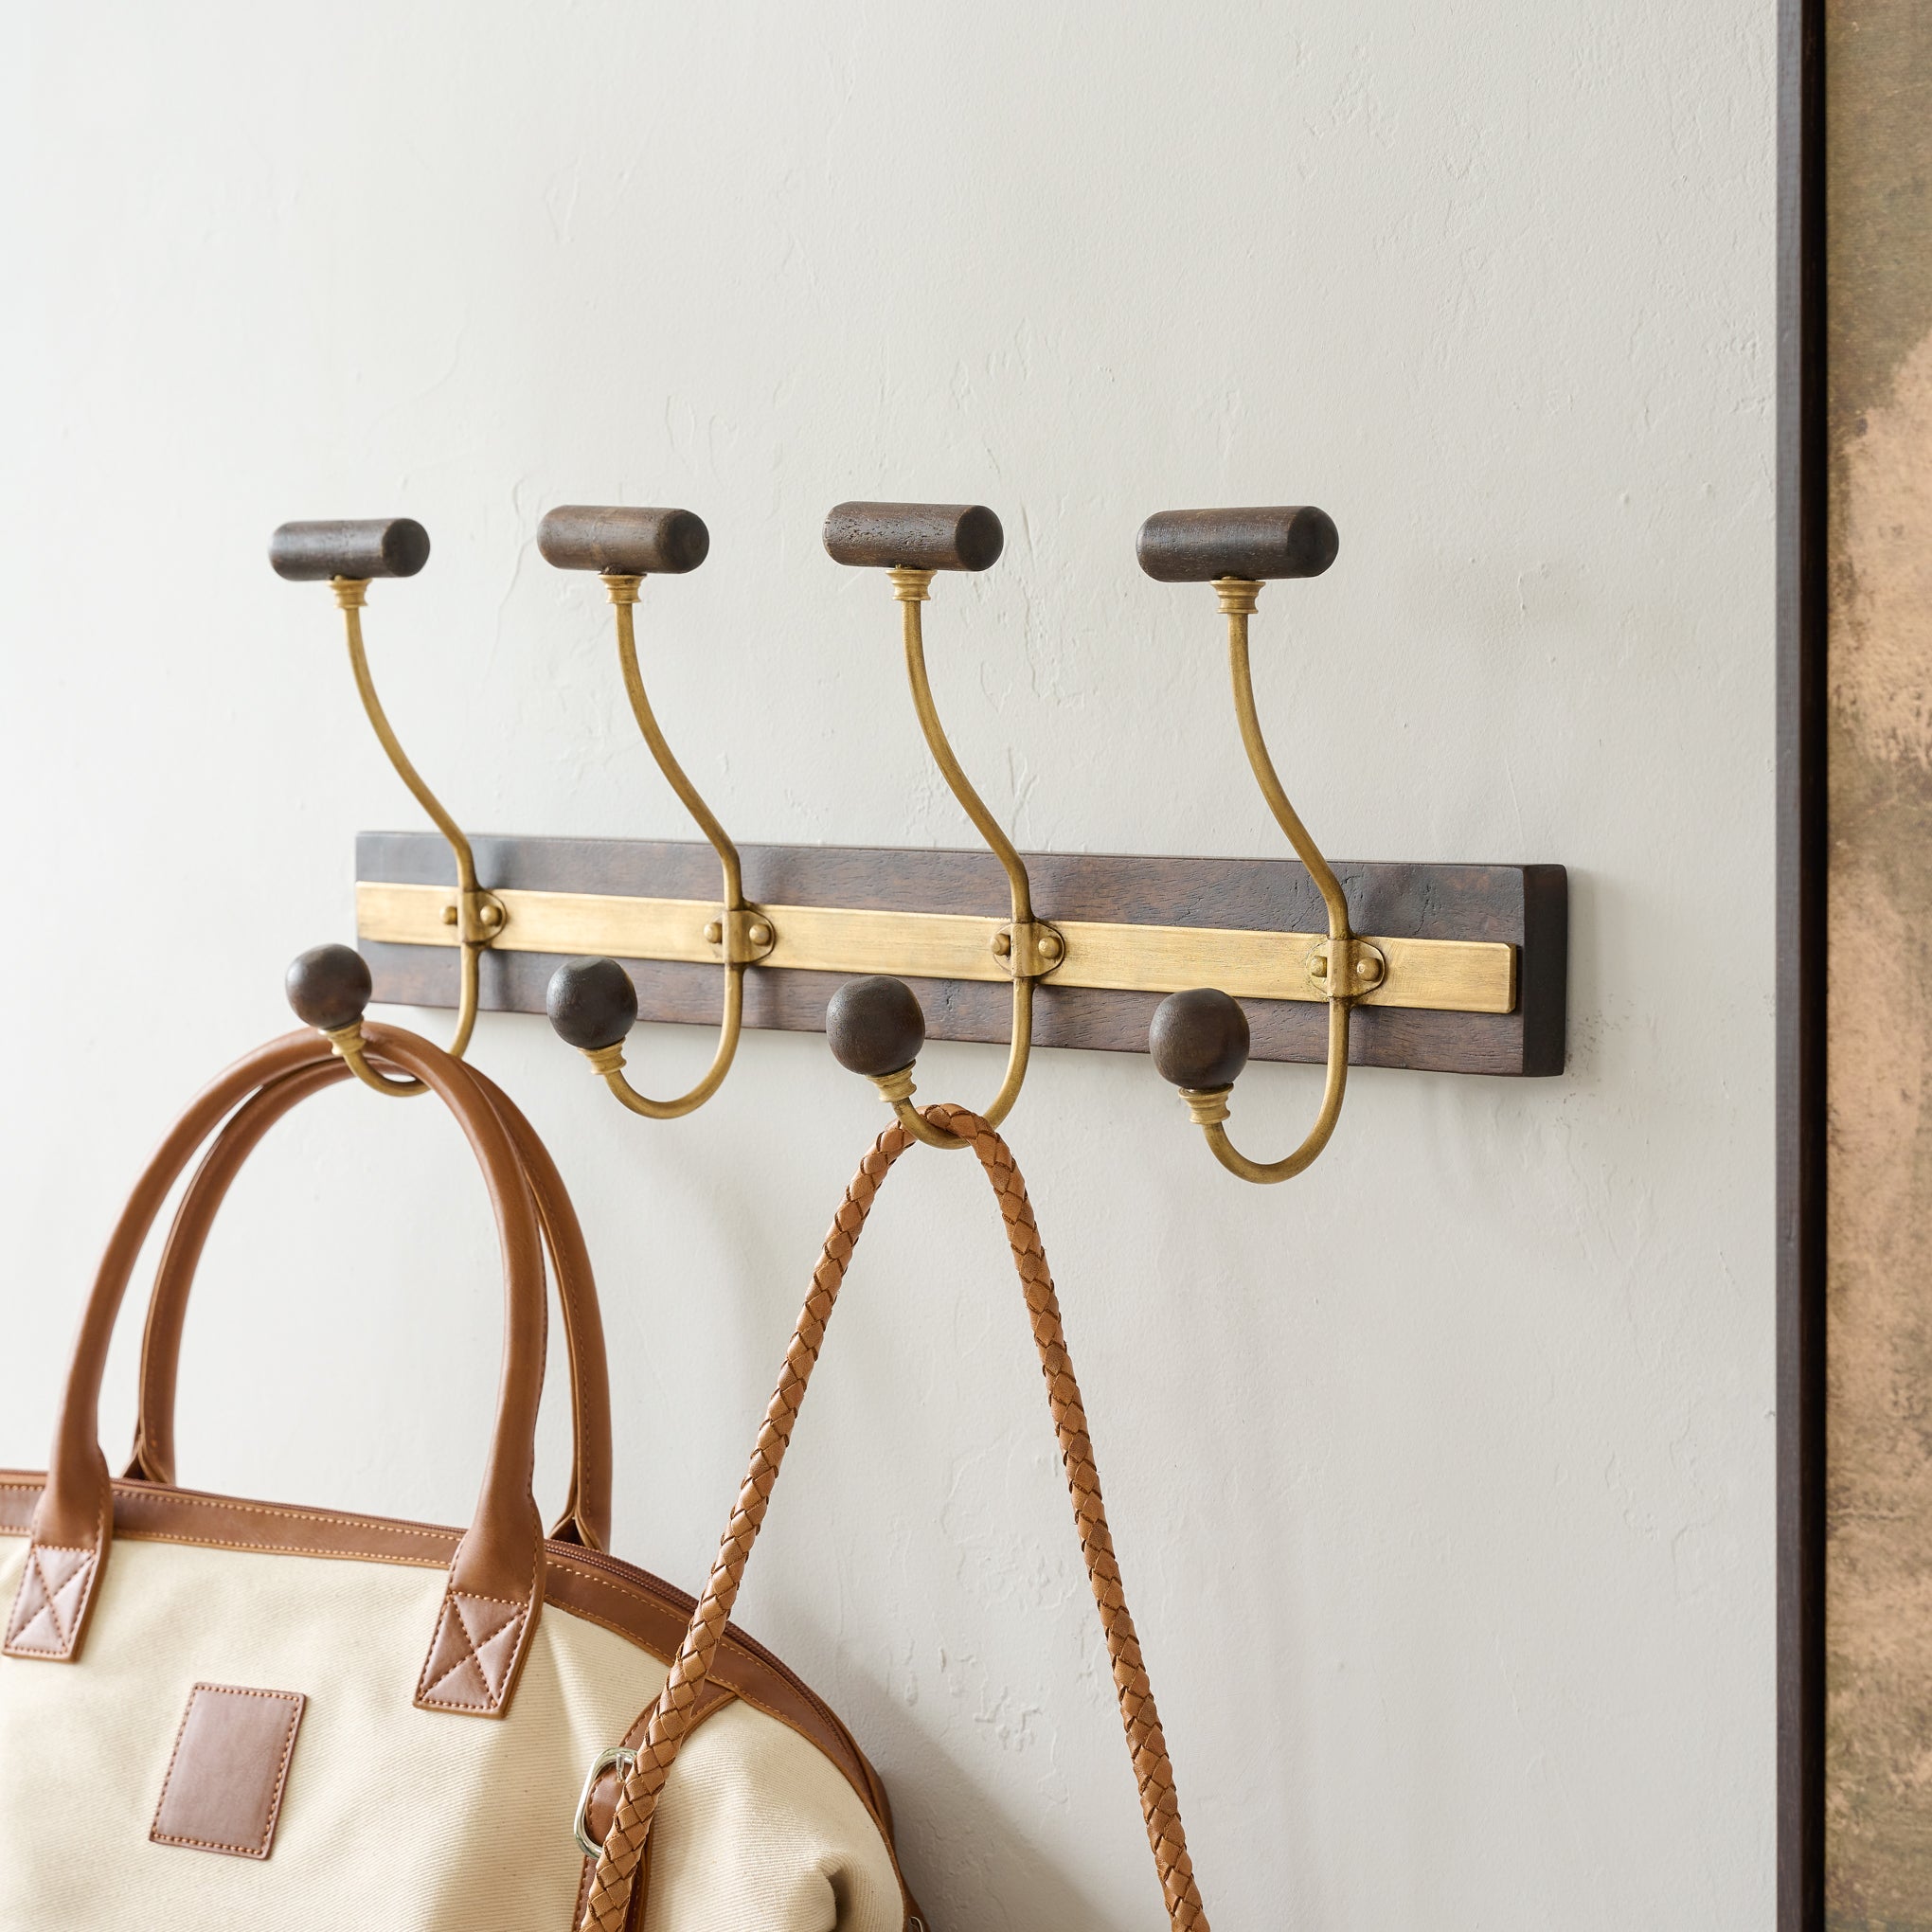 Reed Antiqued Brass Wall Hook